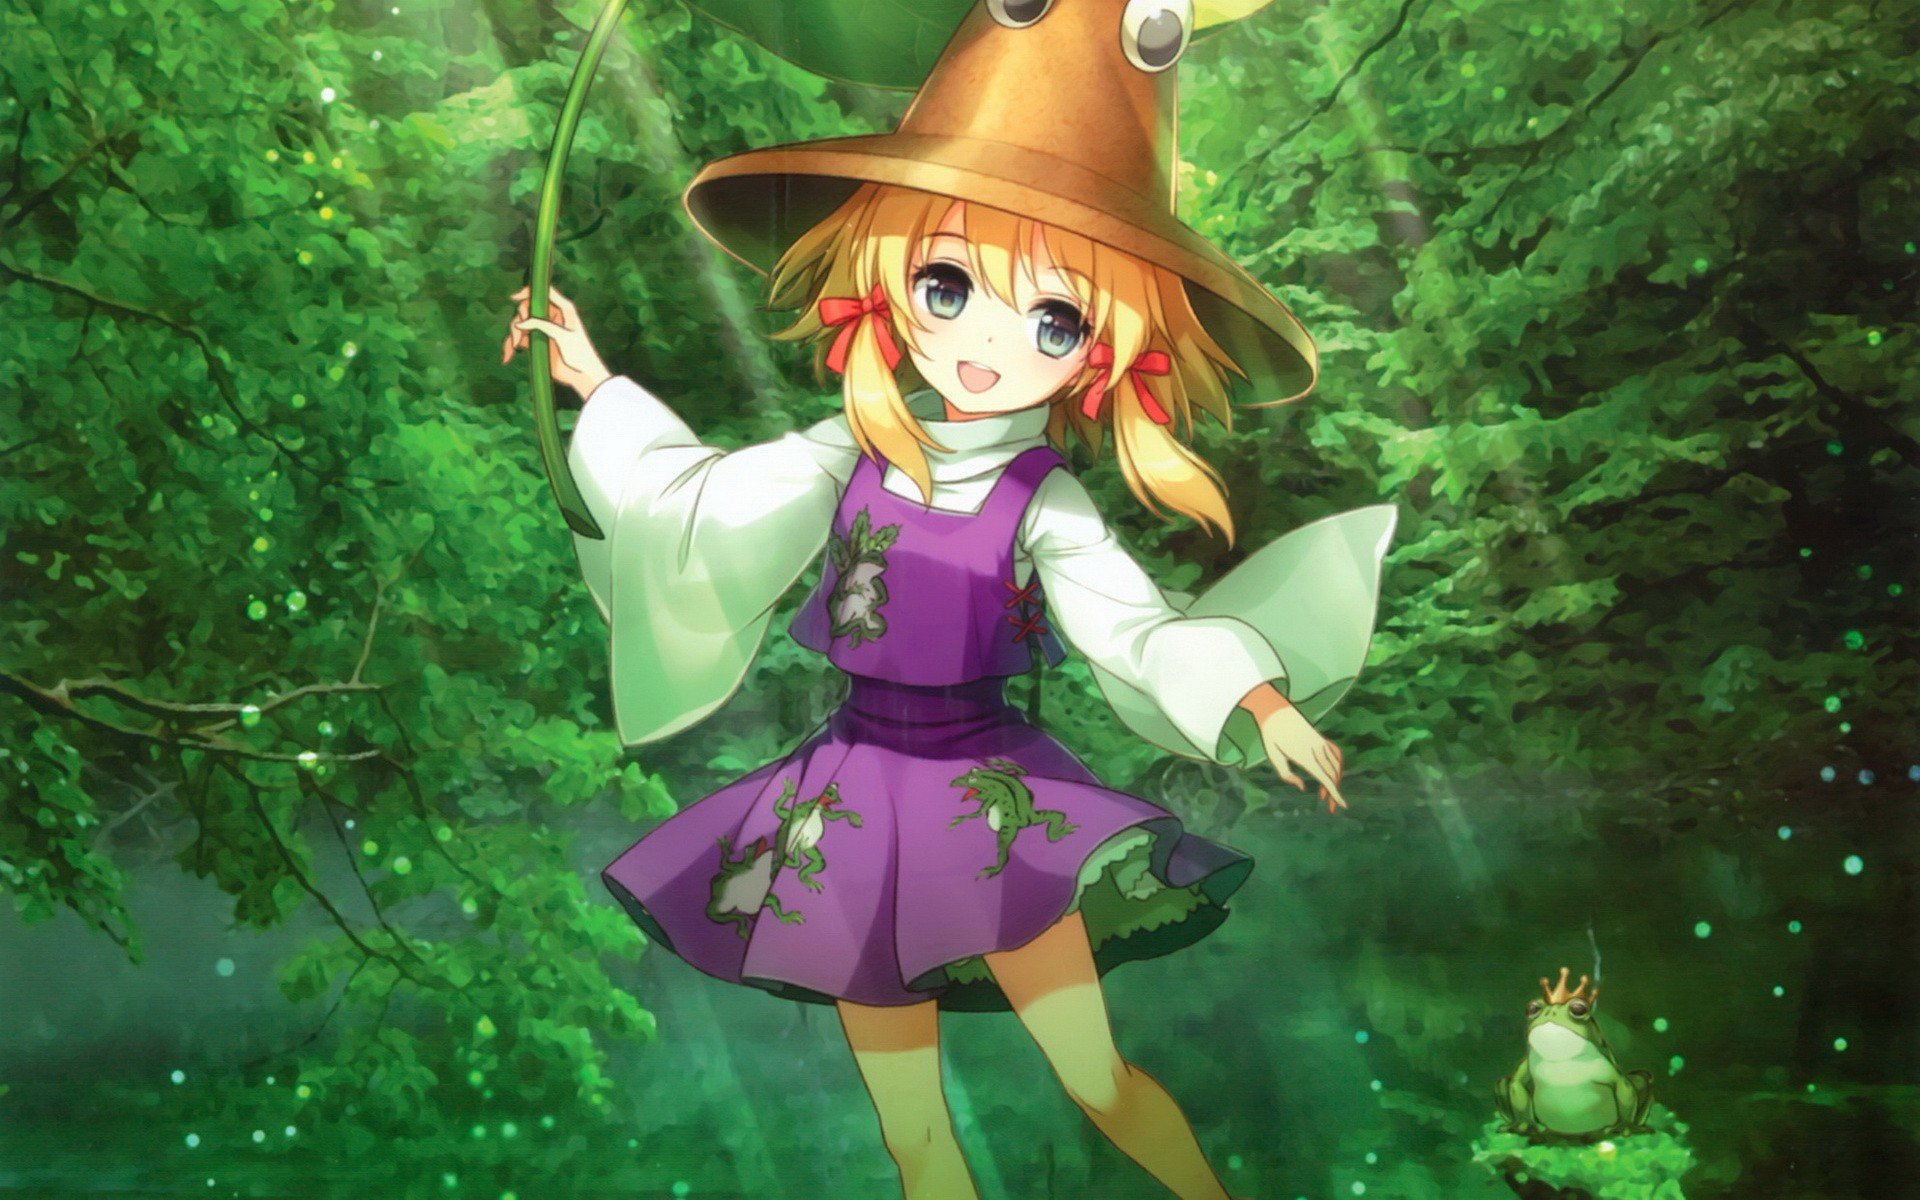 blondes, Green, Water, Video, Games, Nature, Touhou, Trees, Dress, Animals, Leaves, Skirts, Green, Eyes, Short, Hair, Frogs, Sunlight, Twintails, Moriya, Suwako, Smiling, Bows, Open, Mouth, Crows, Purple, Dress, Wallpaper